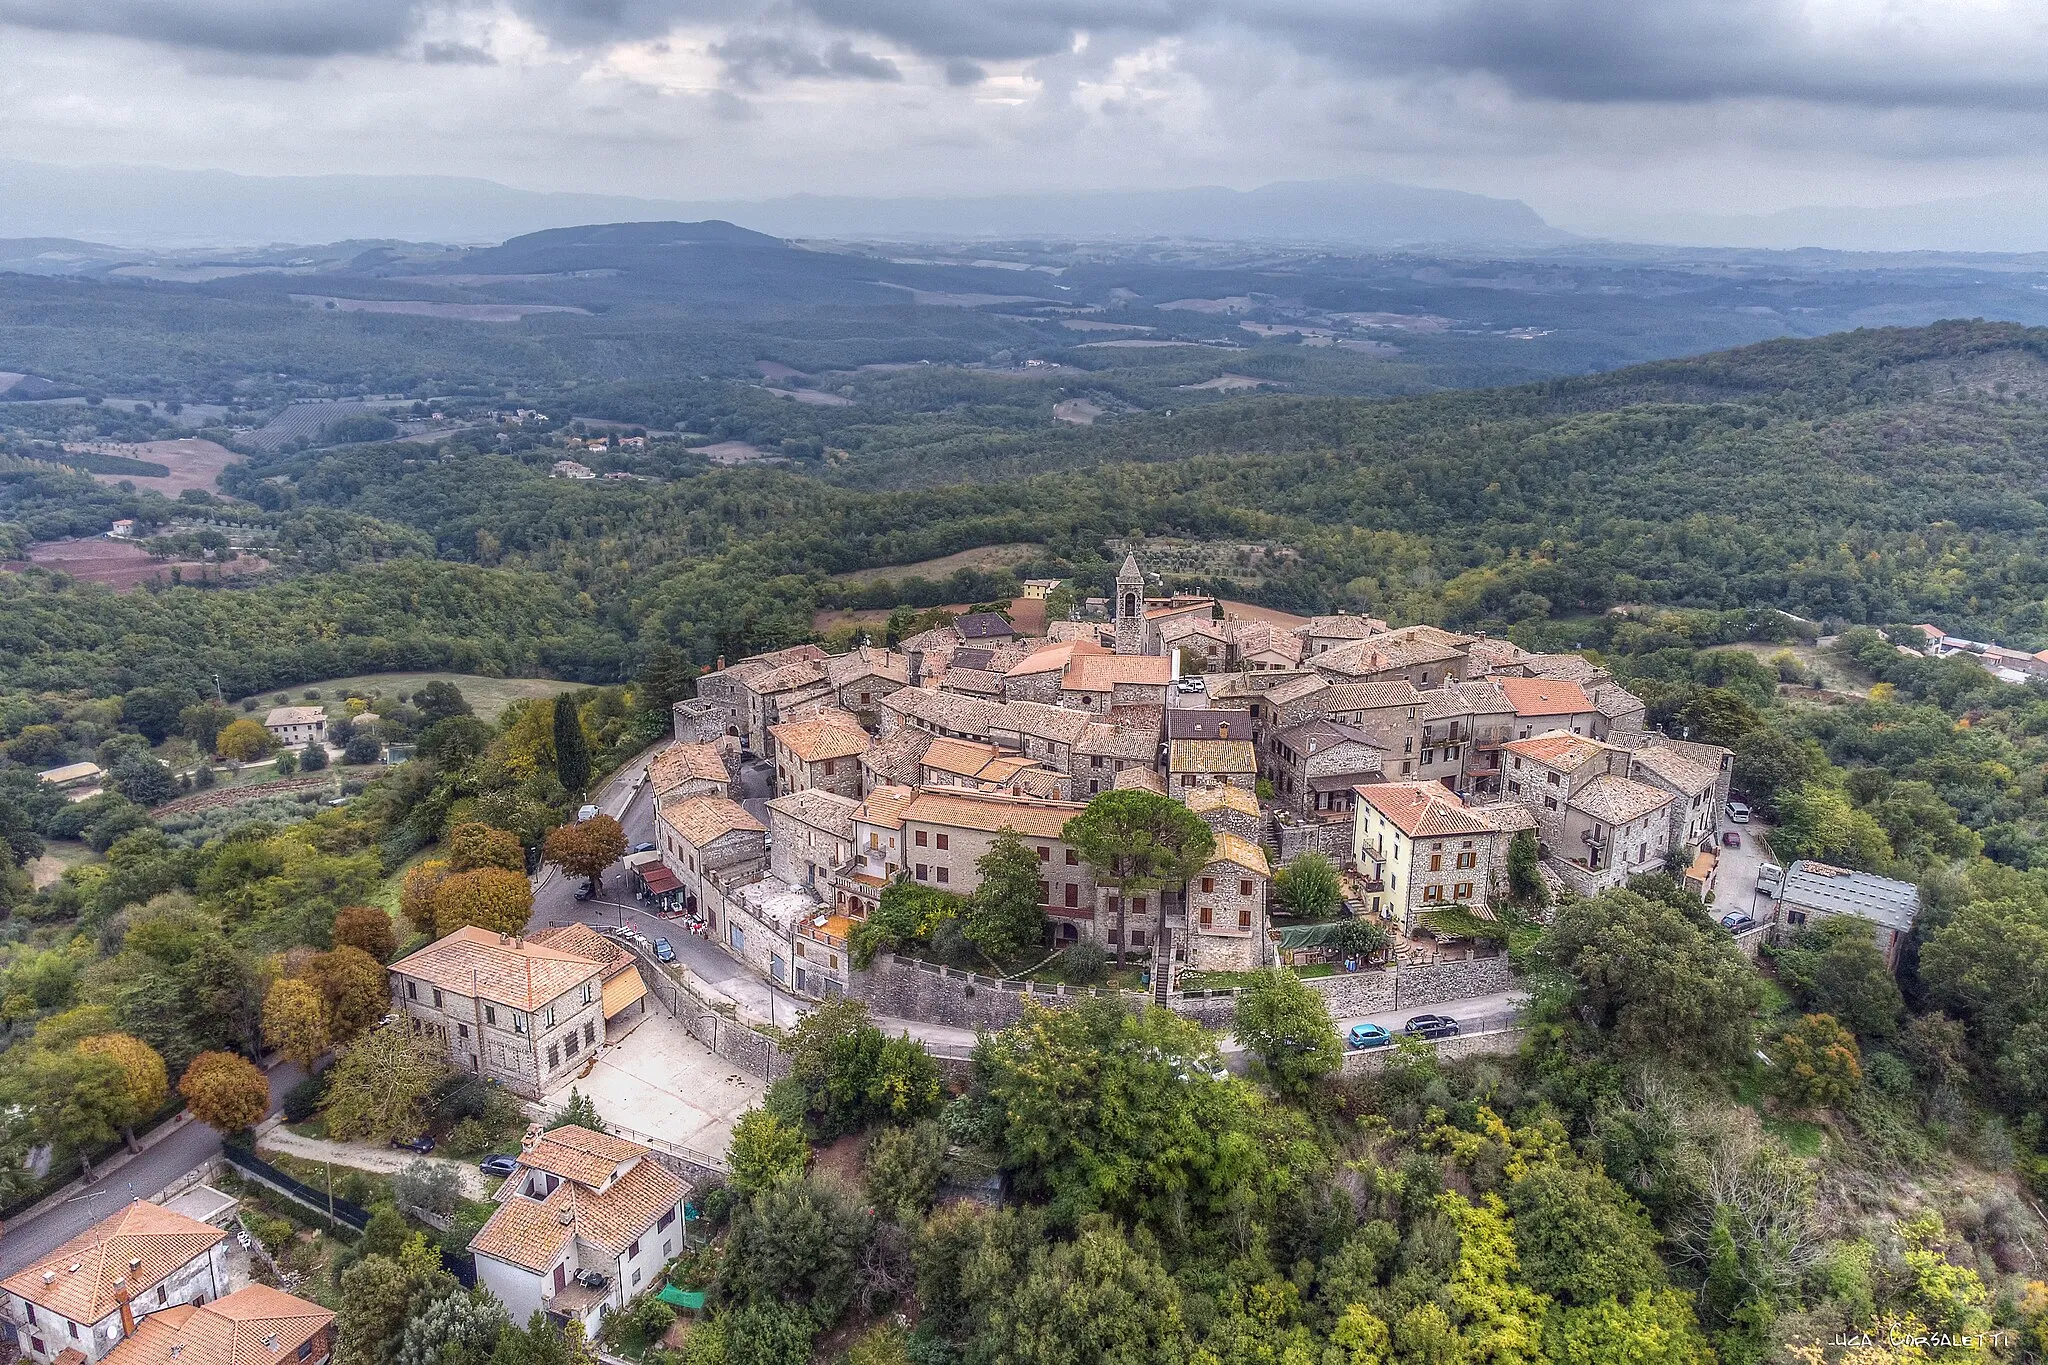 Photo showing: Melezzole is a fraction of the municipality of Montecchio (TR), located in the Amerini mountains on the border with Tuderte. It is located at a height of 611 m a.s.l. and is inhabited by 211 residents (Istat data, 2001).